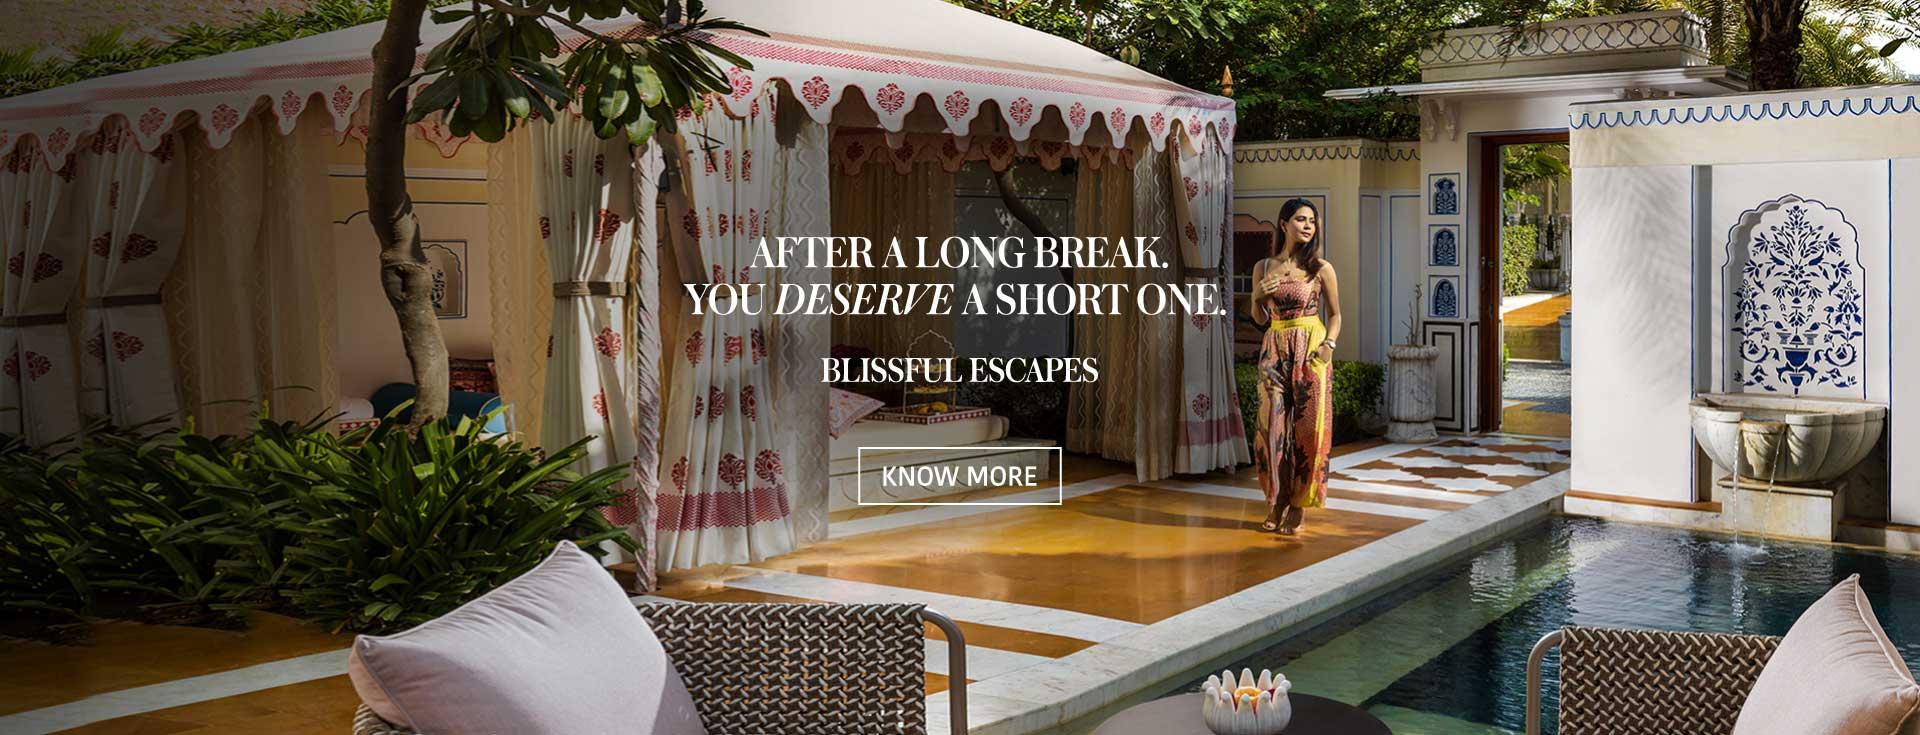 Blissful Escapes Offer